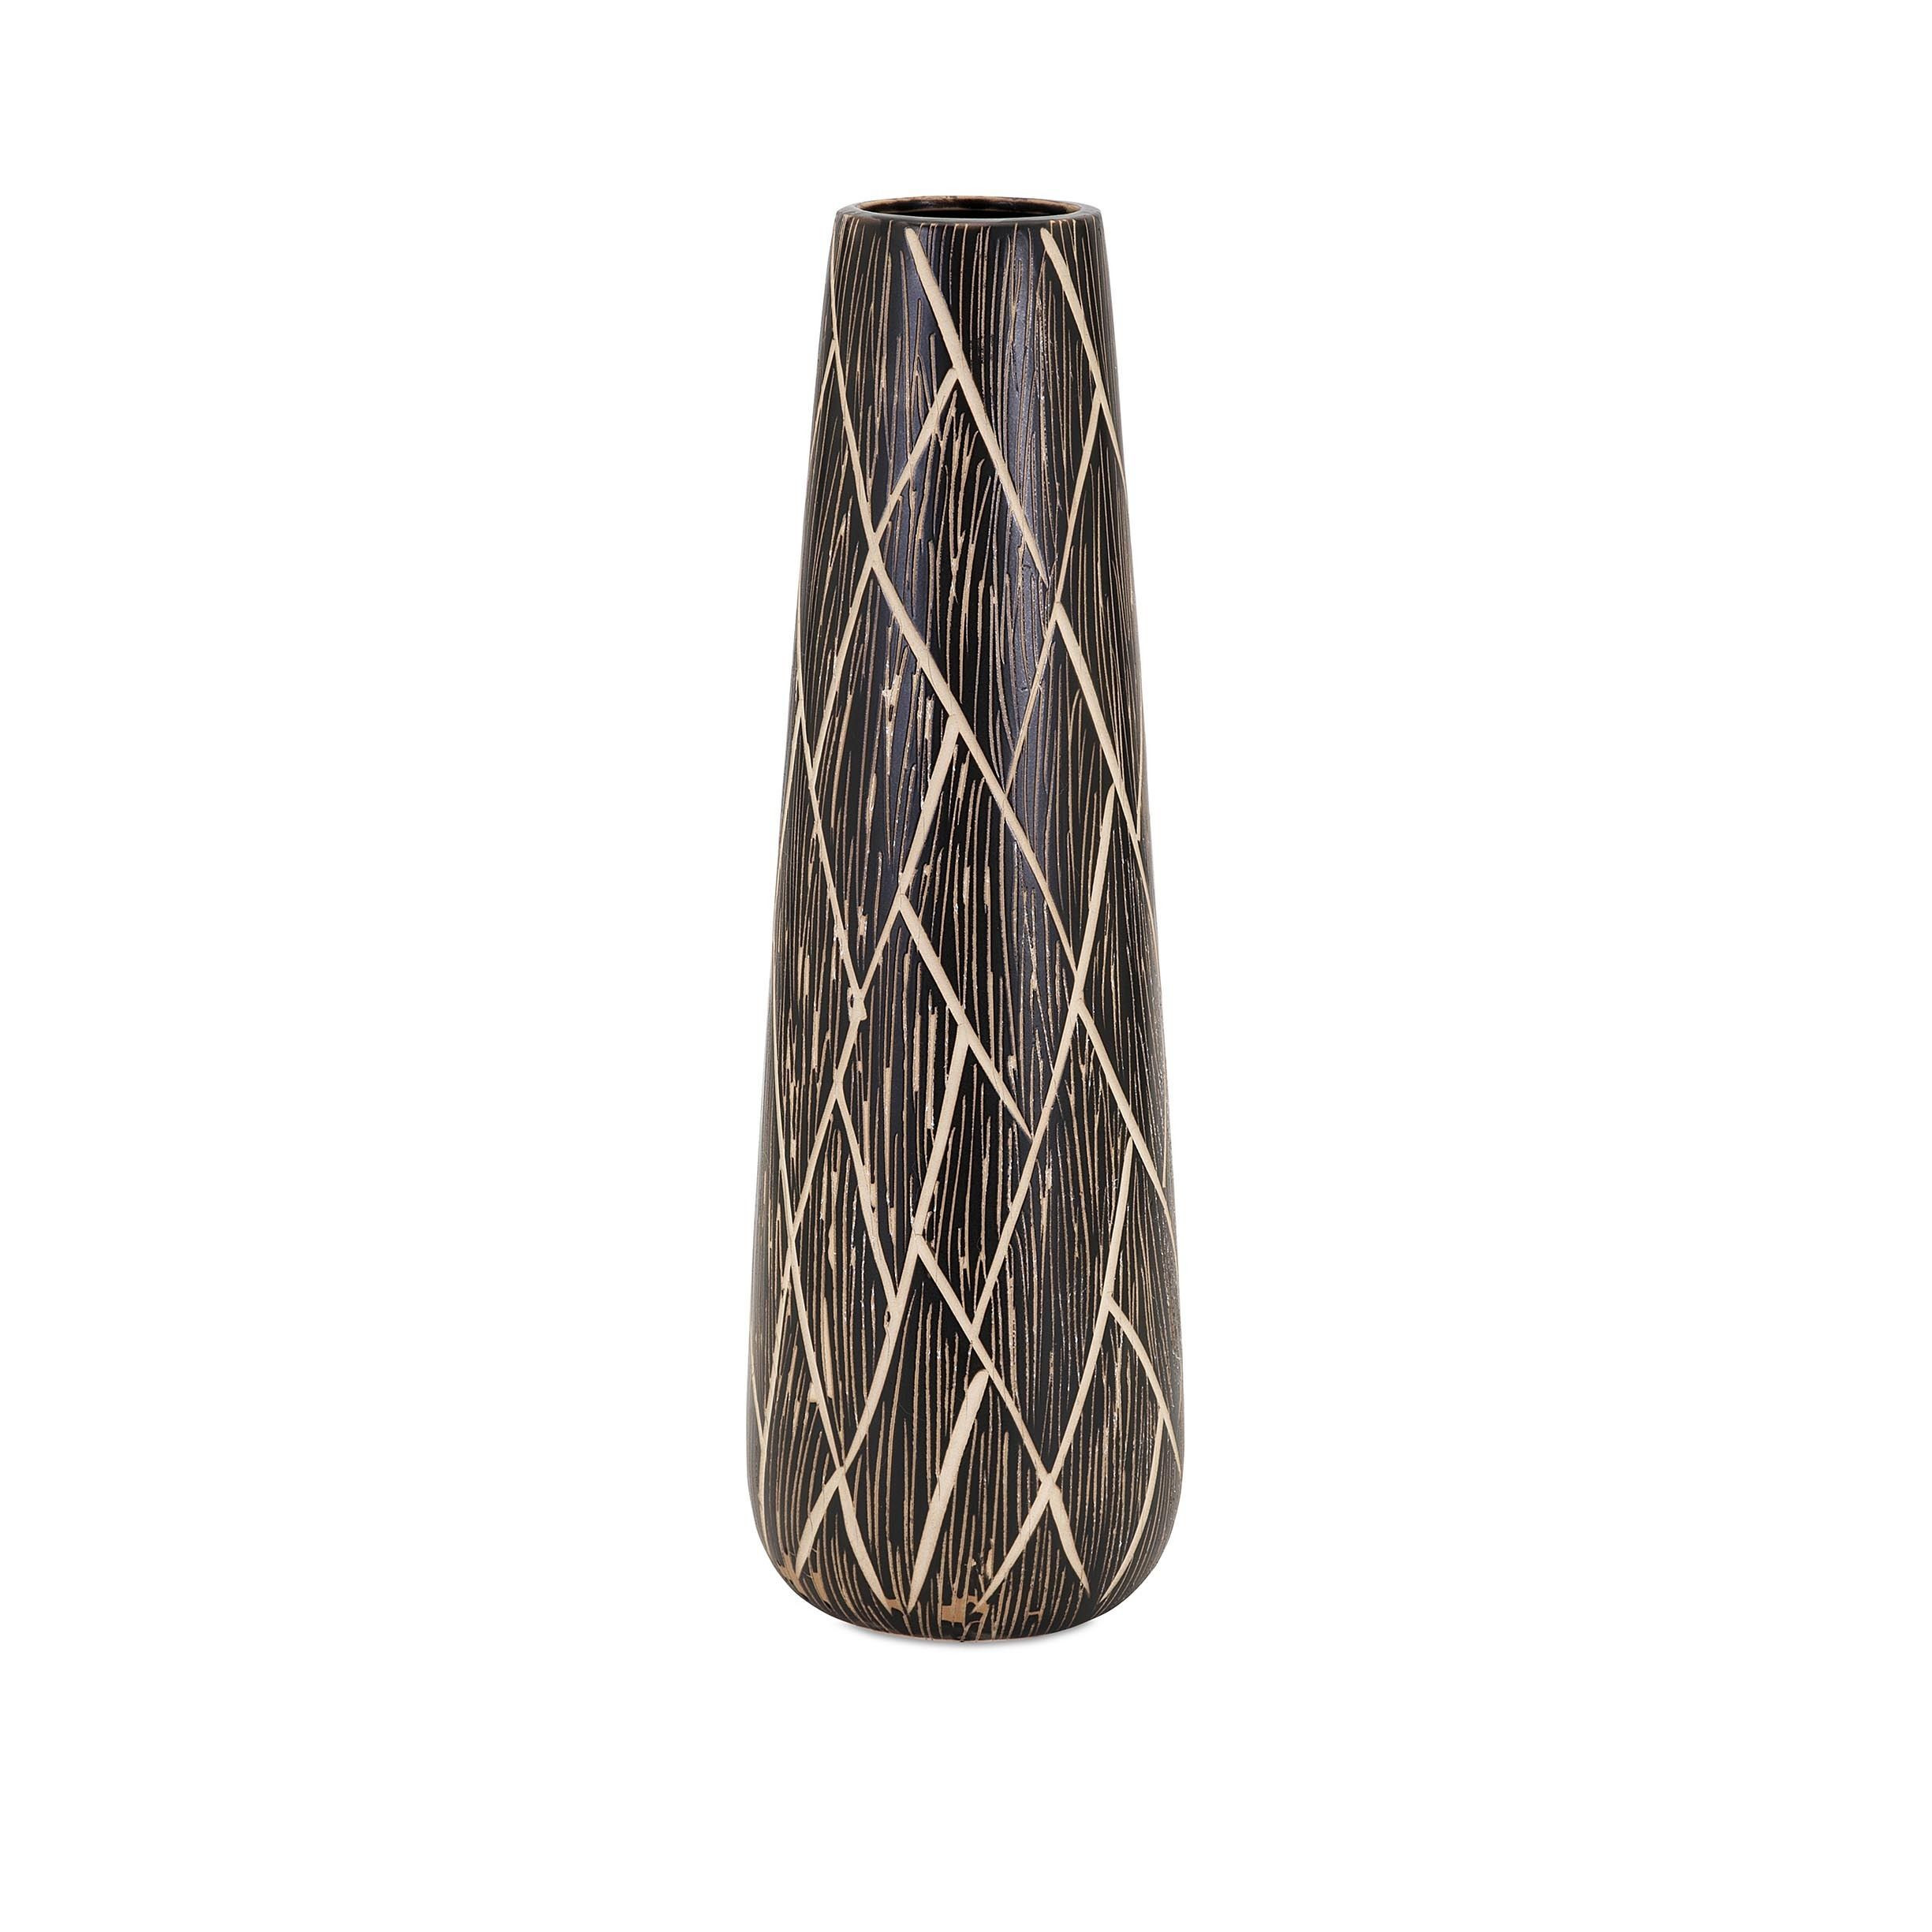 22 Unique Large Mosaic Vase 2024 free download large mosaic vase of imax cayman small vase small brown ceramic outlet store inside imax cayman small vase small brown ceramic